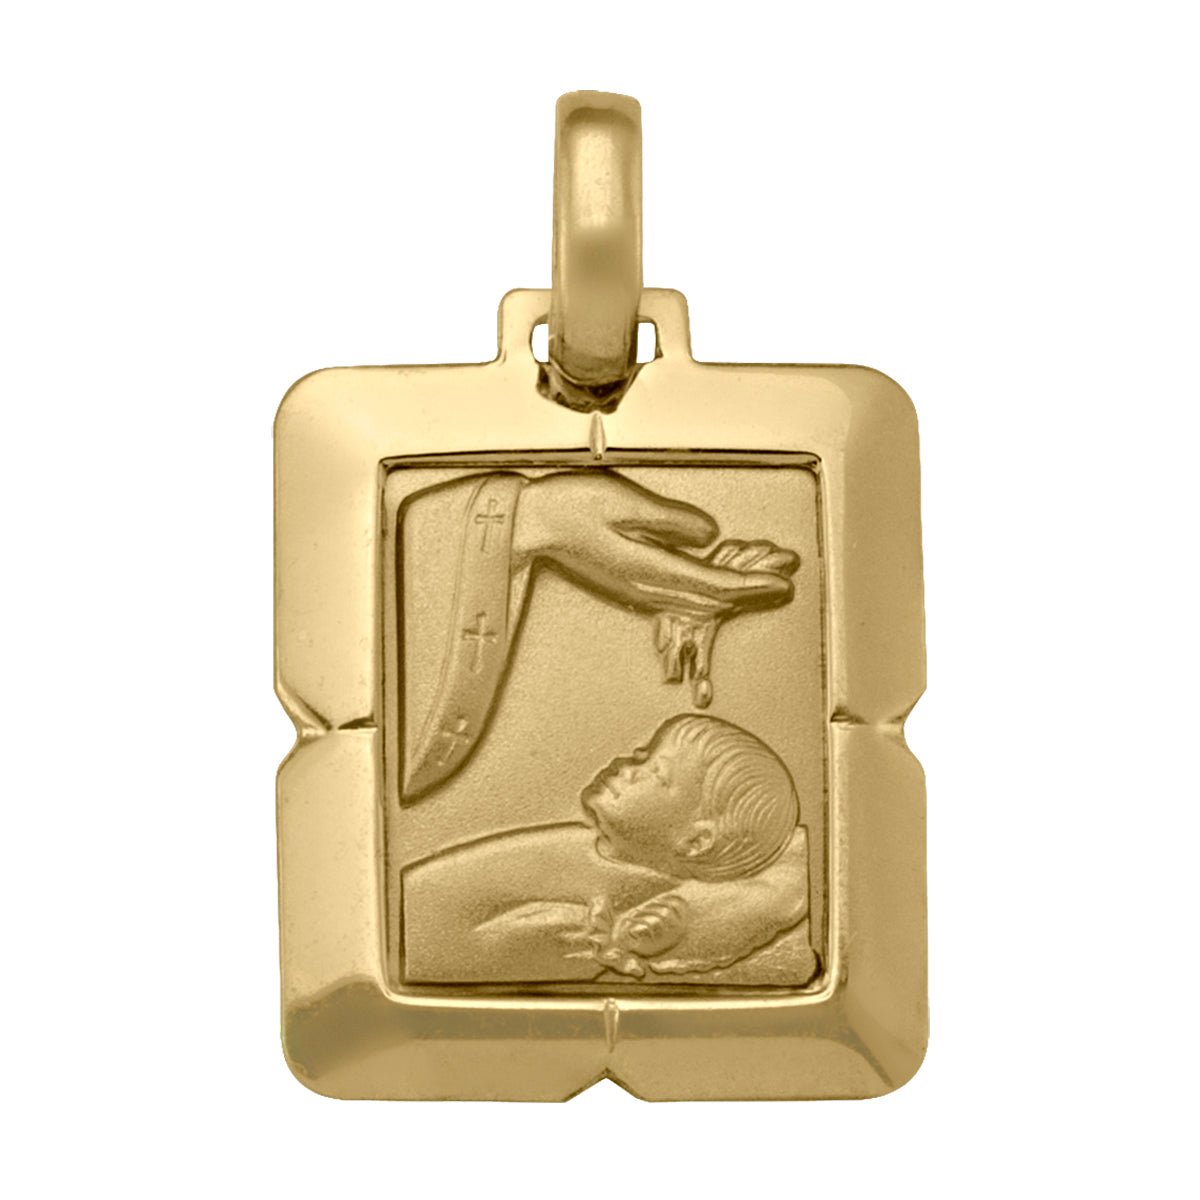 BAPTISM MEDAL YELLOW GOLD HOLLOW